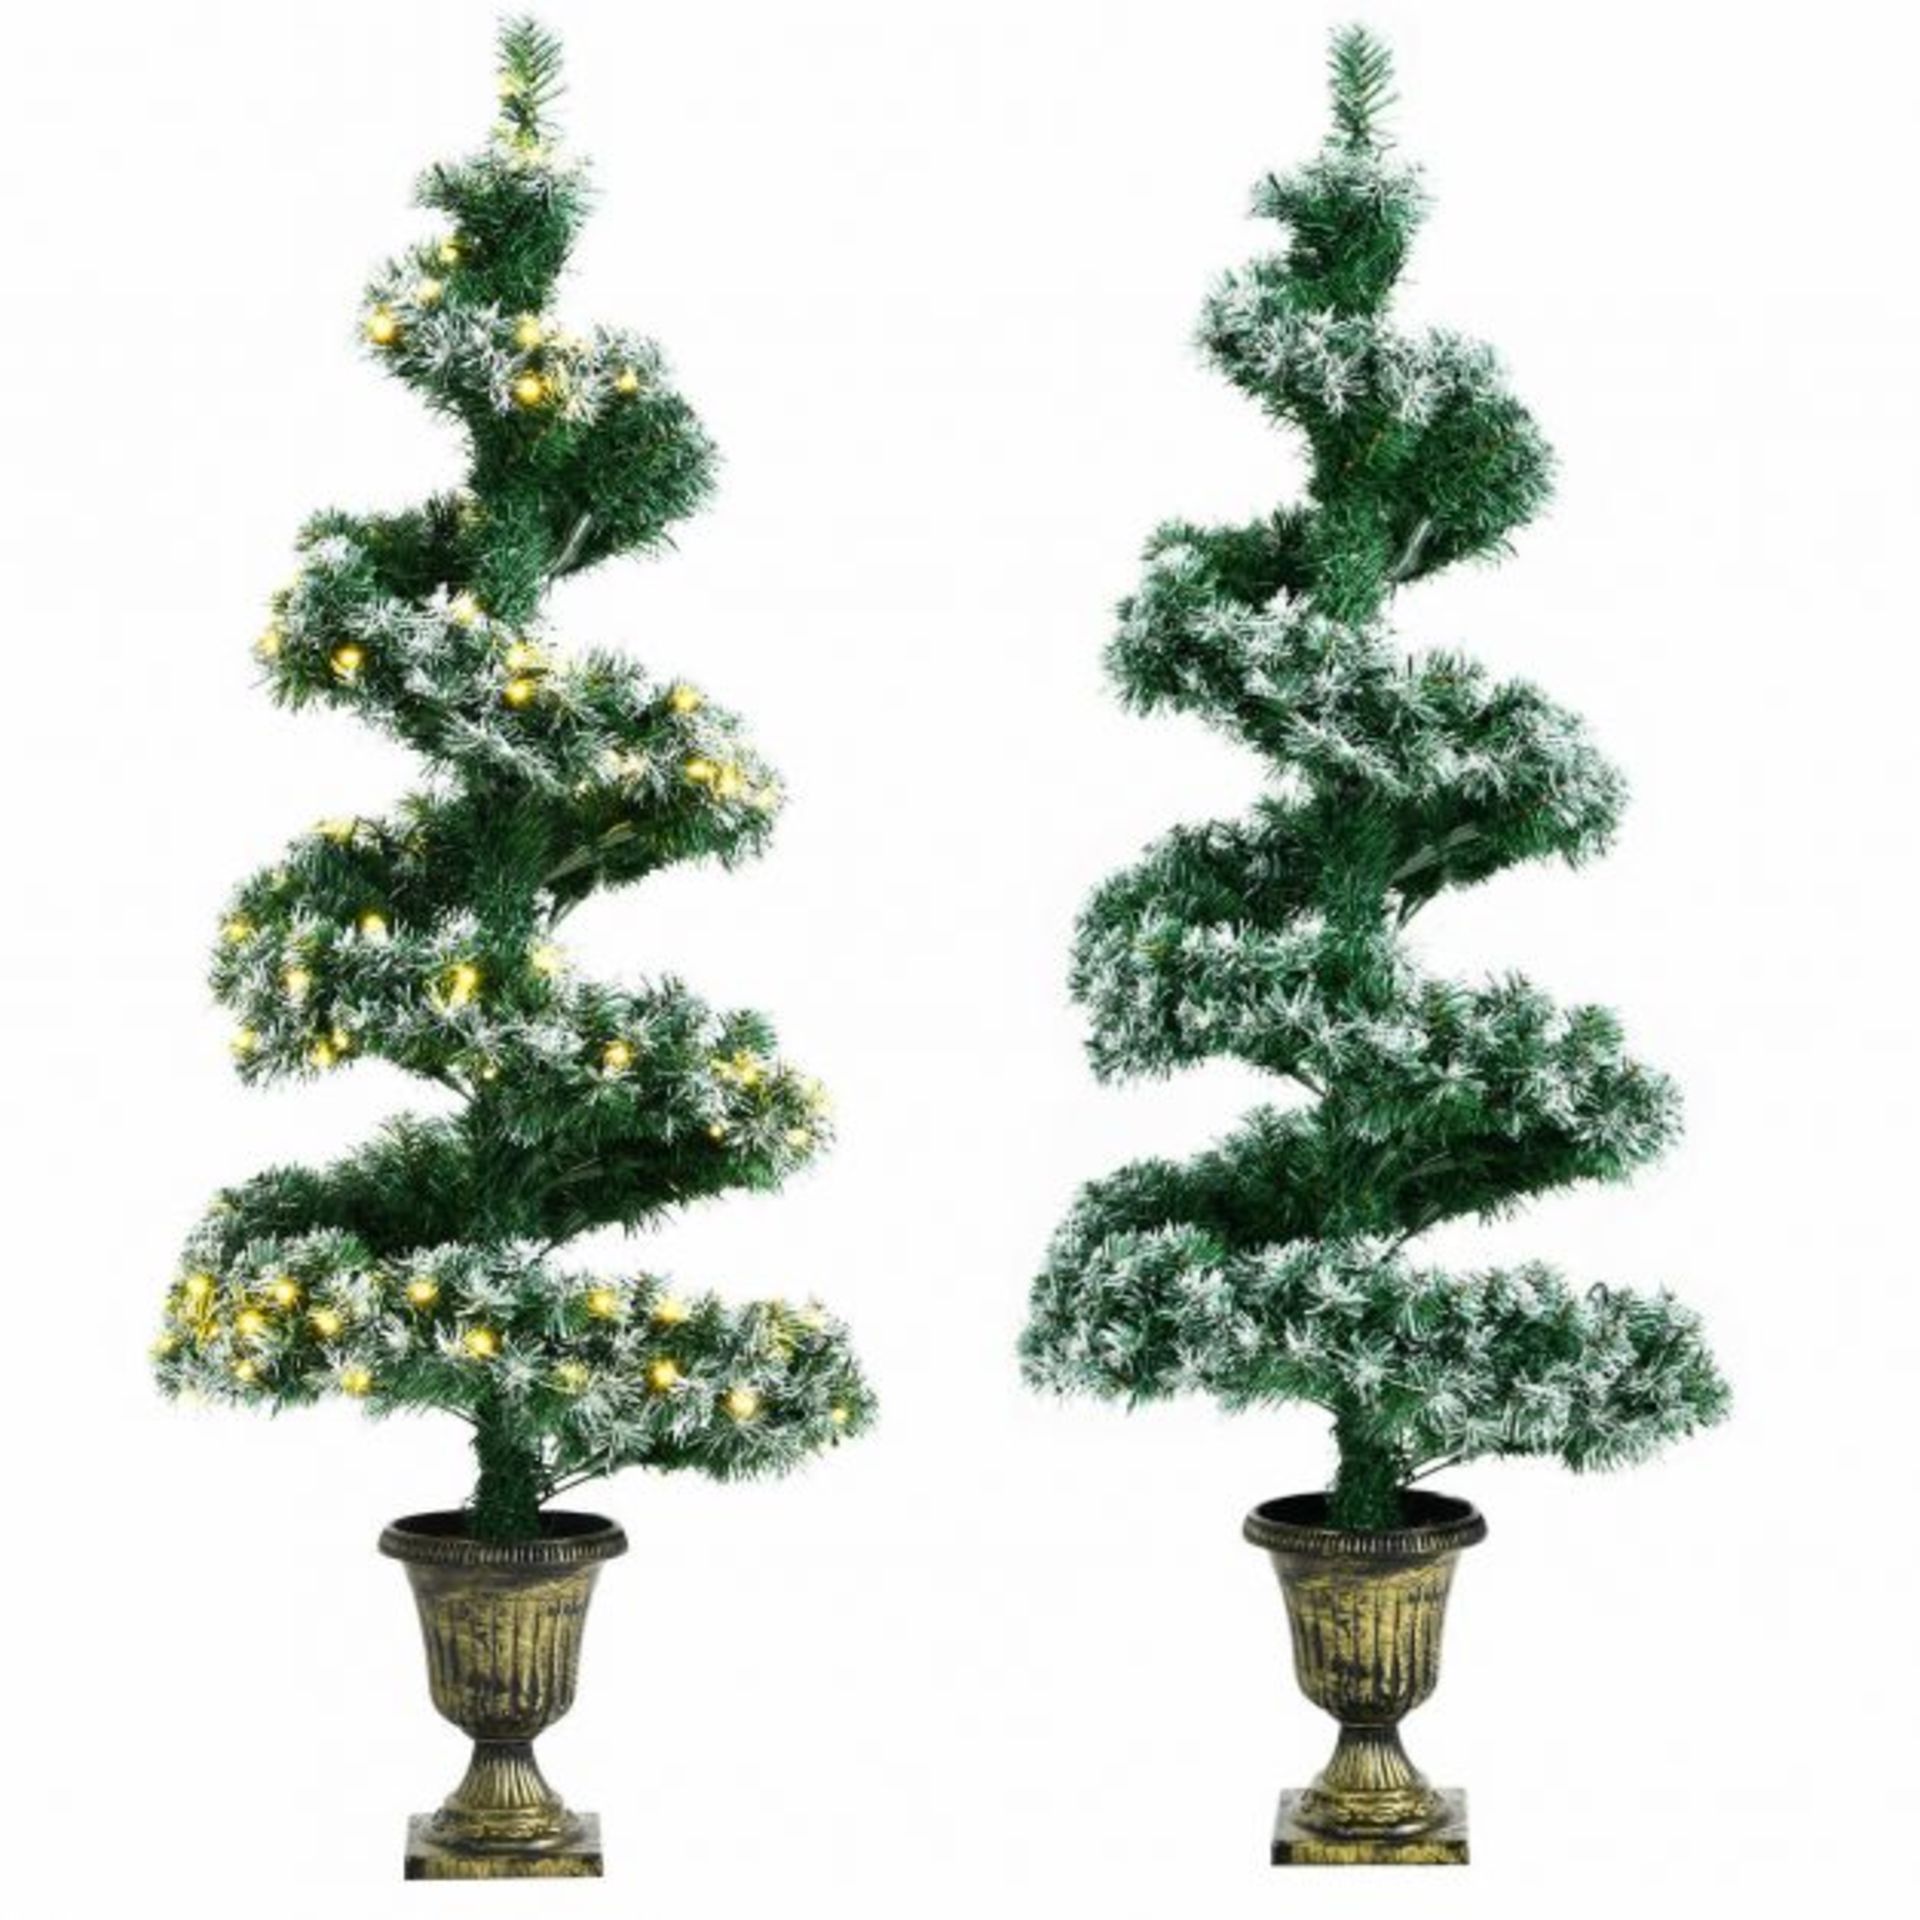 Pre-Lit Spiral Topiary Xmas Tree with LED Lights and 364 PVC Tips. - R13.16. The spiral shape,